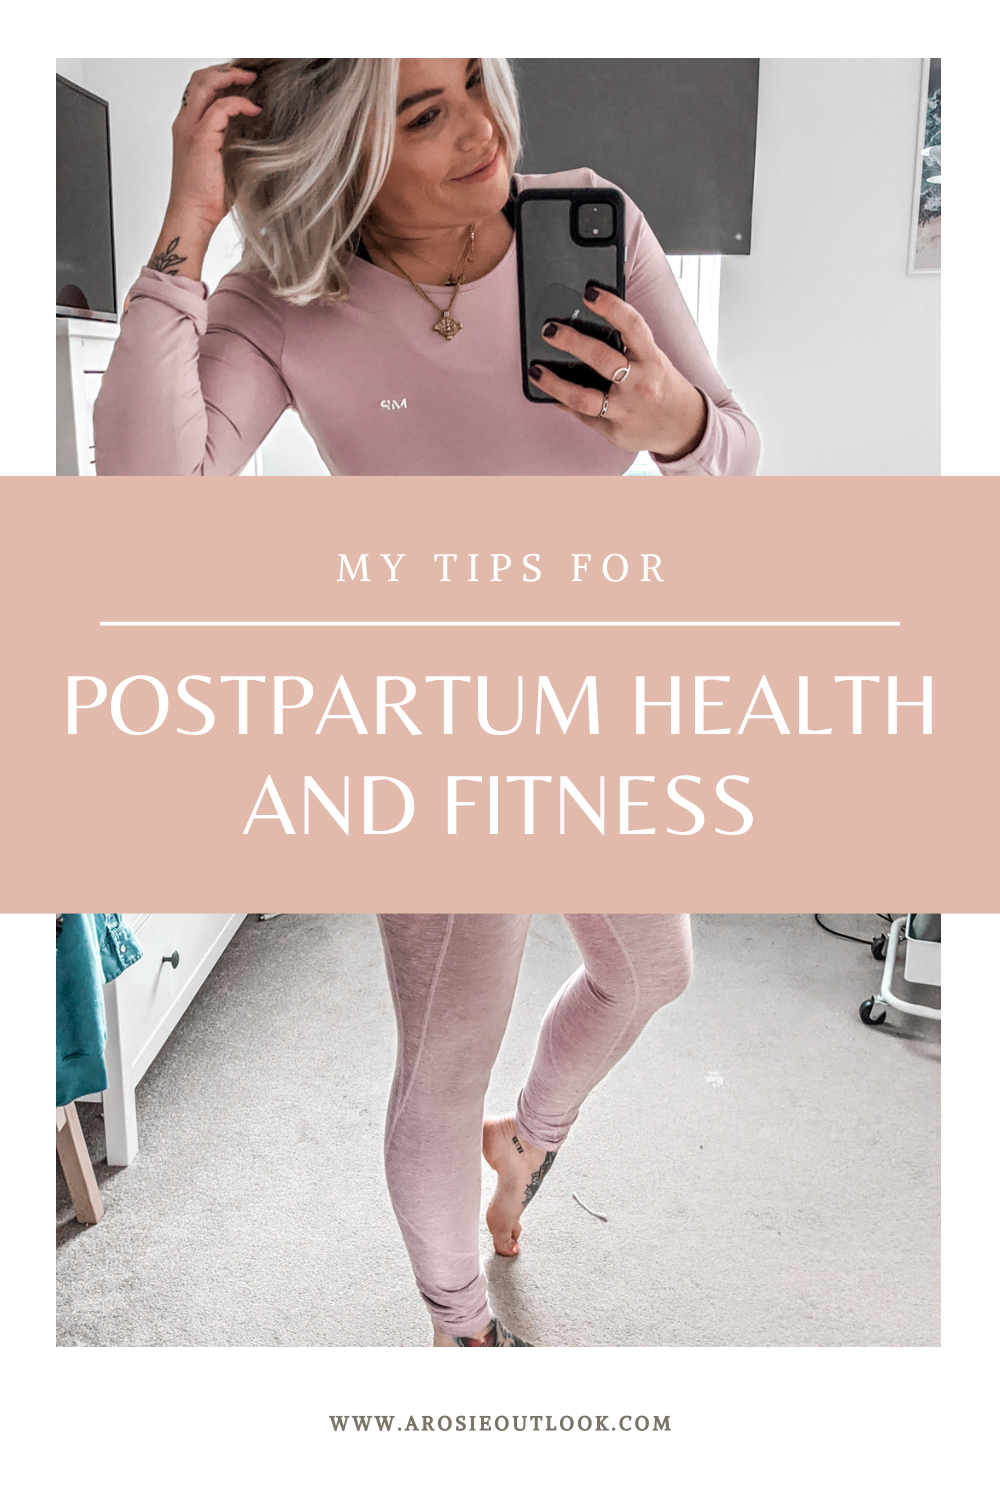 my tips and experiences of postpartum health and fitness